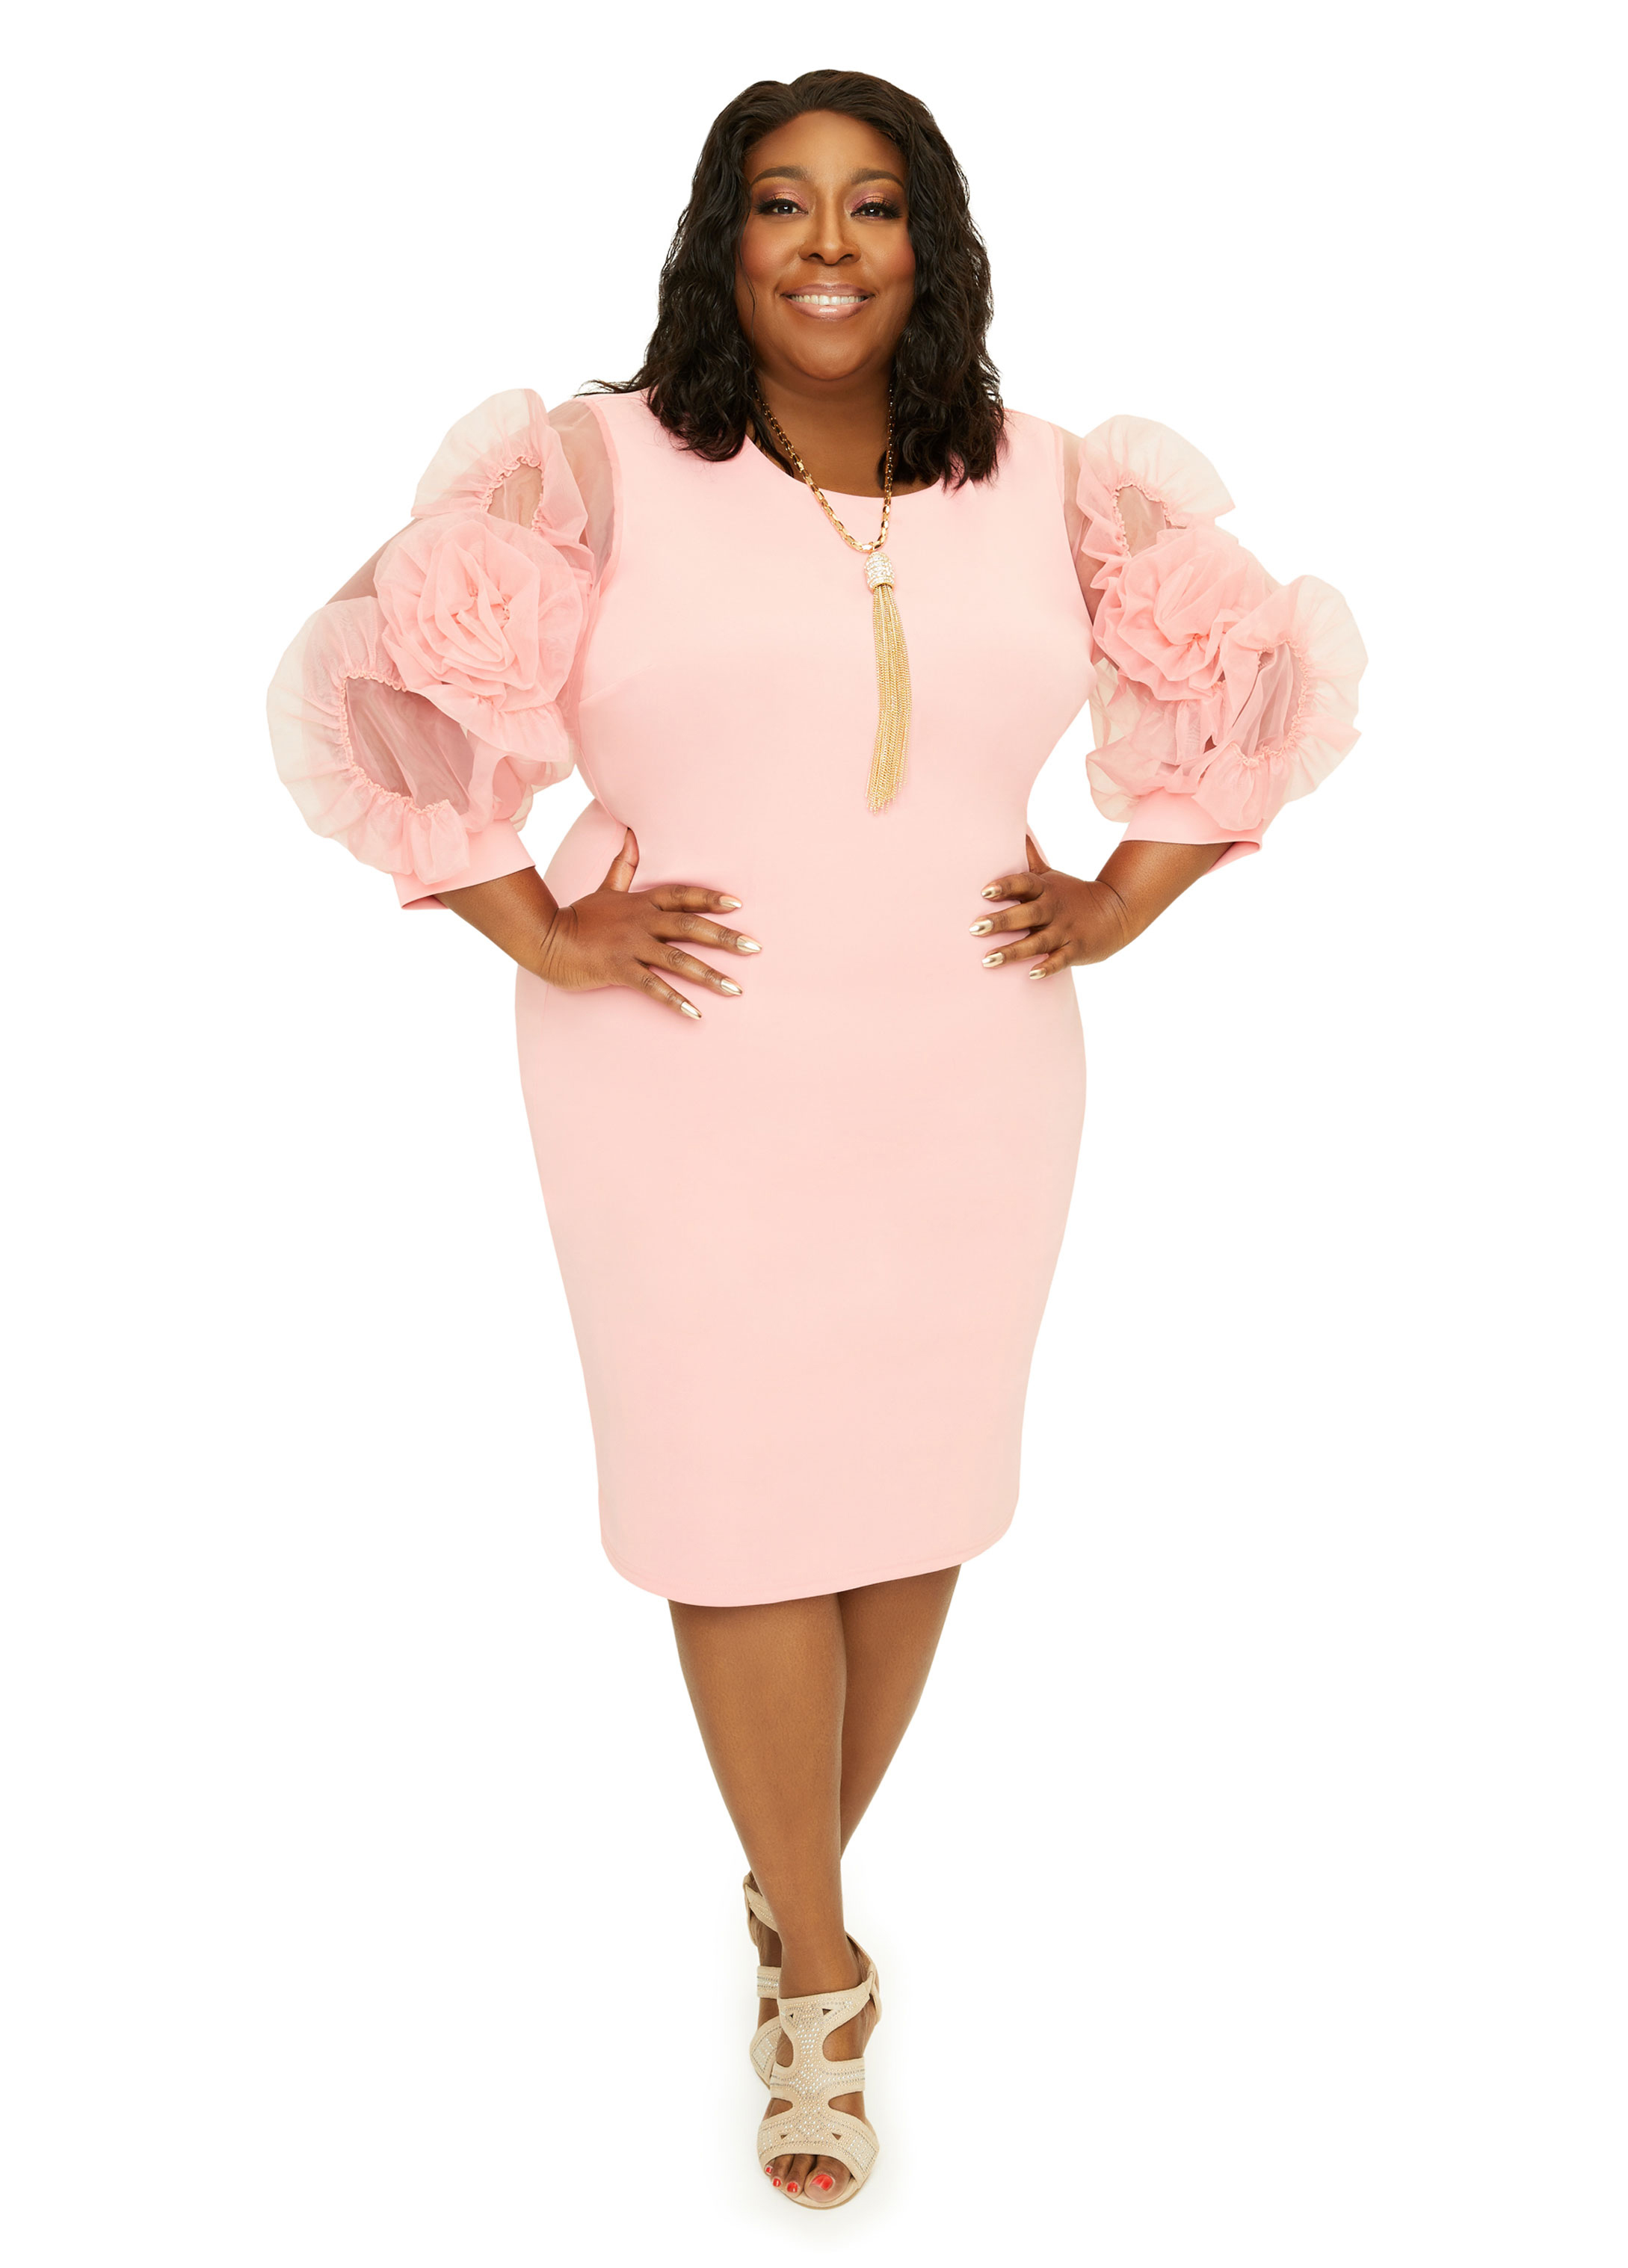 Check Out All The Looks From Loni Loves New Ashley Stewart Collection